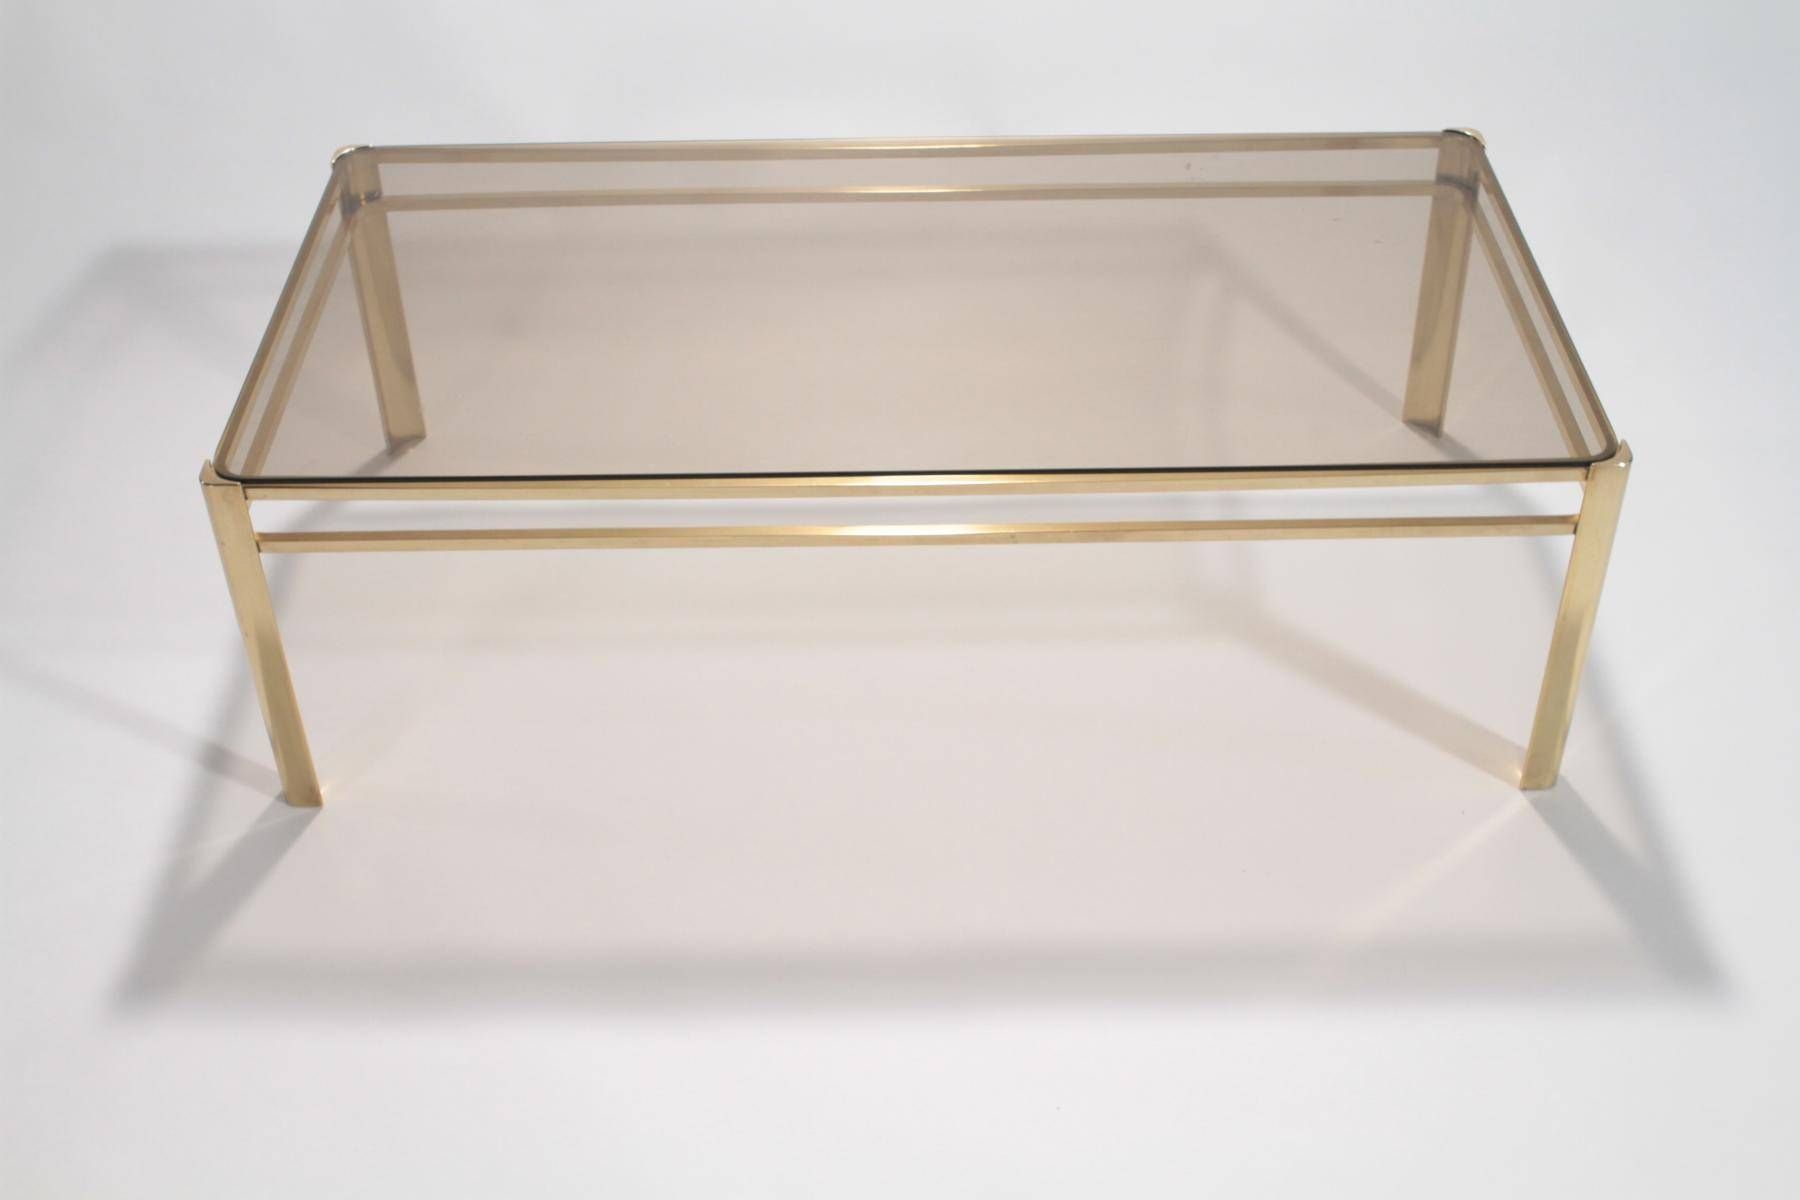 Bronze Coffee Tables / Coffee Tables / Thippo For Bronze Coffee Table Glass Top (View 13 of 30)